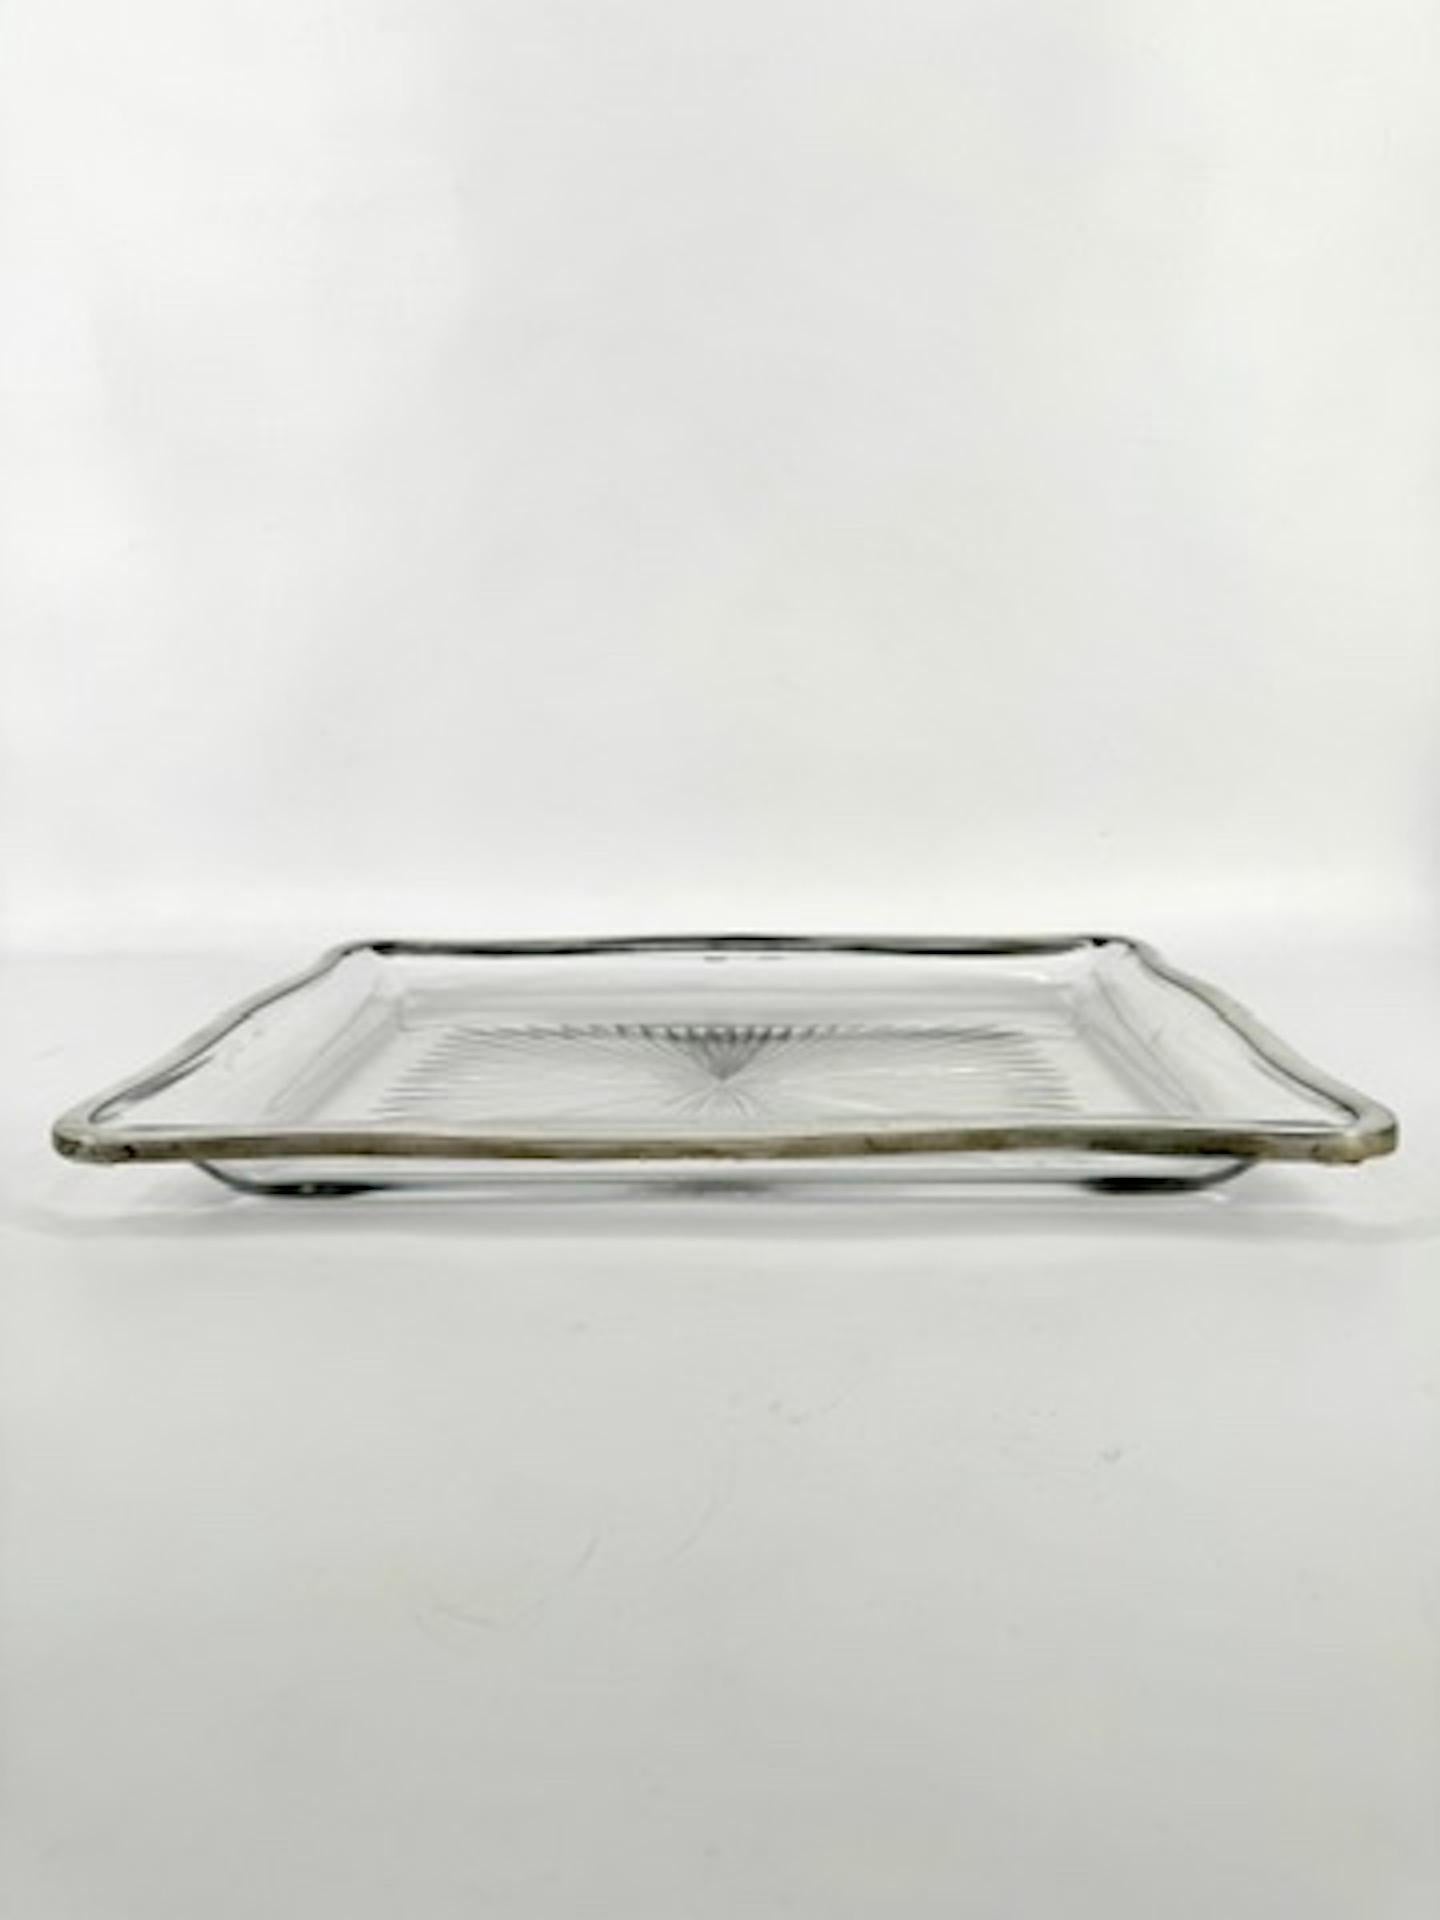 An elegant French XIXth century crystal tray with depth and round shapes, mounted with a silver strapping. 

This rare Baccarat tray displays a star shape cut in the crystal of the bottom.

The four sides of the tray are made in a convex shape, a